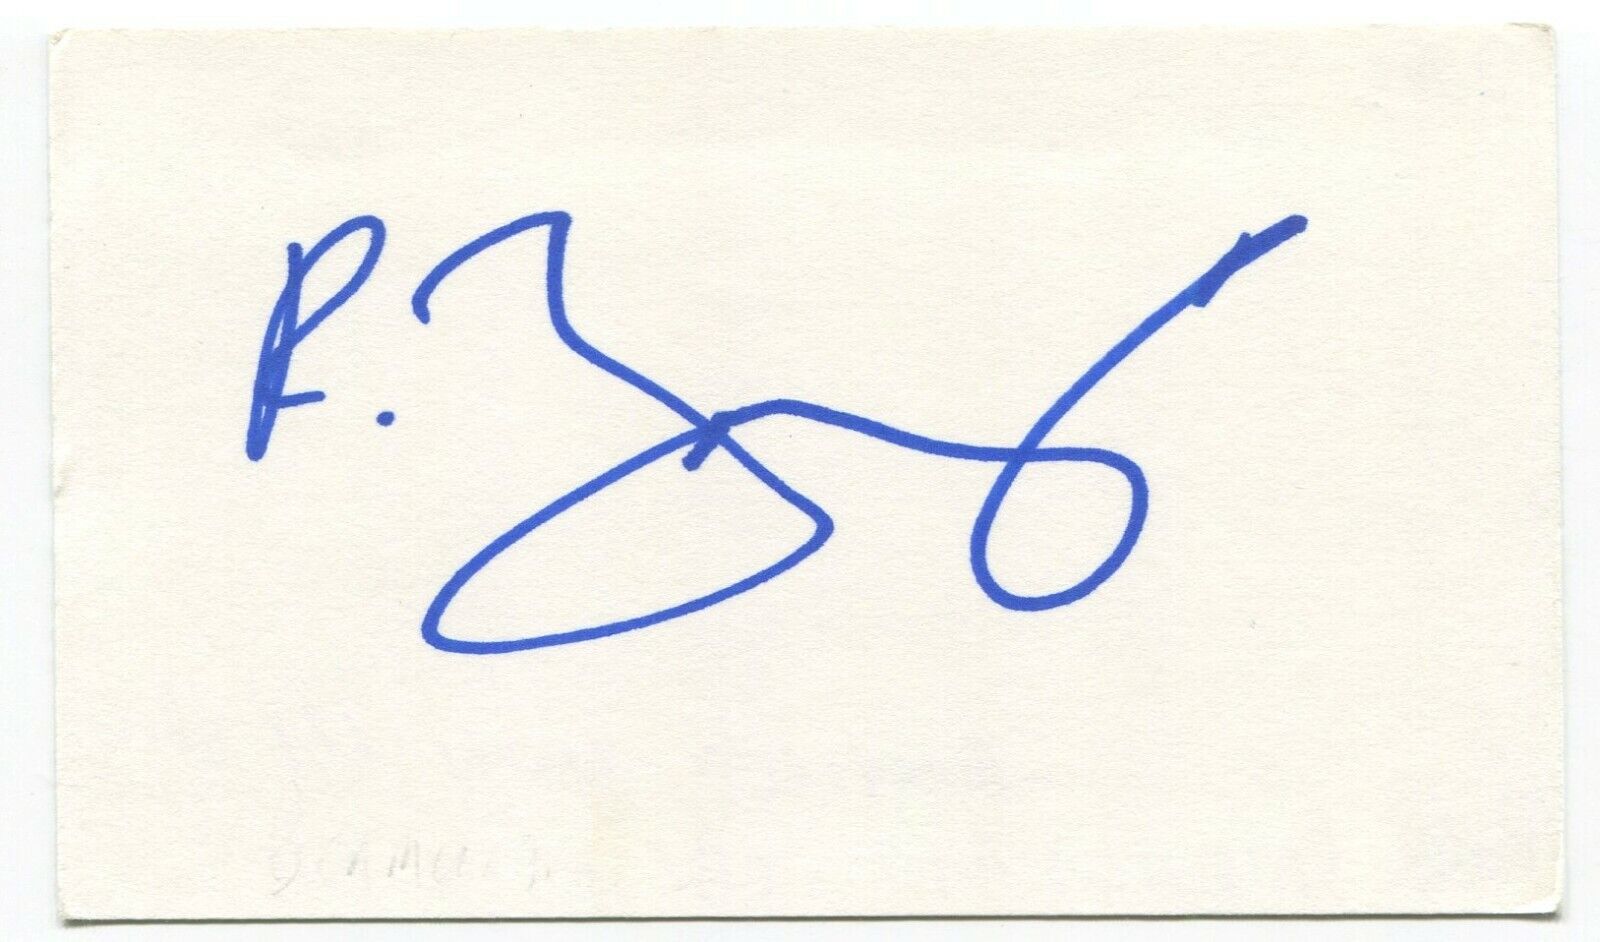 Ralph Benmergui Signed 3x5 Index Card Autographed Signature TV Radio Personality